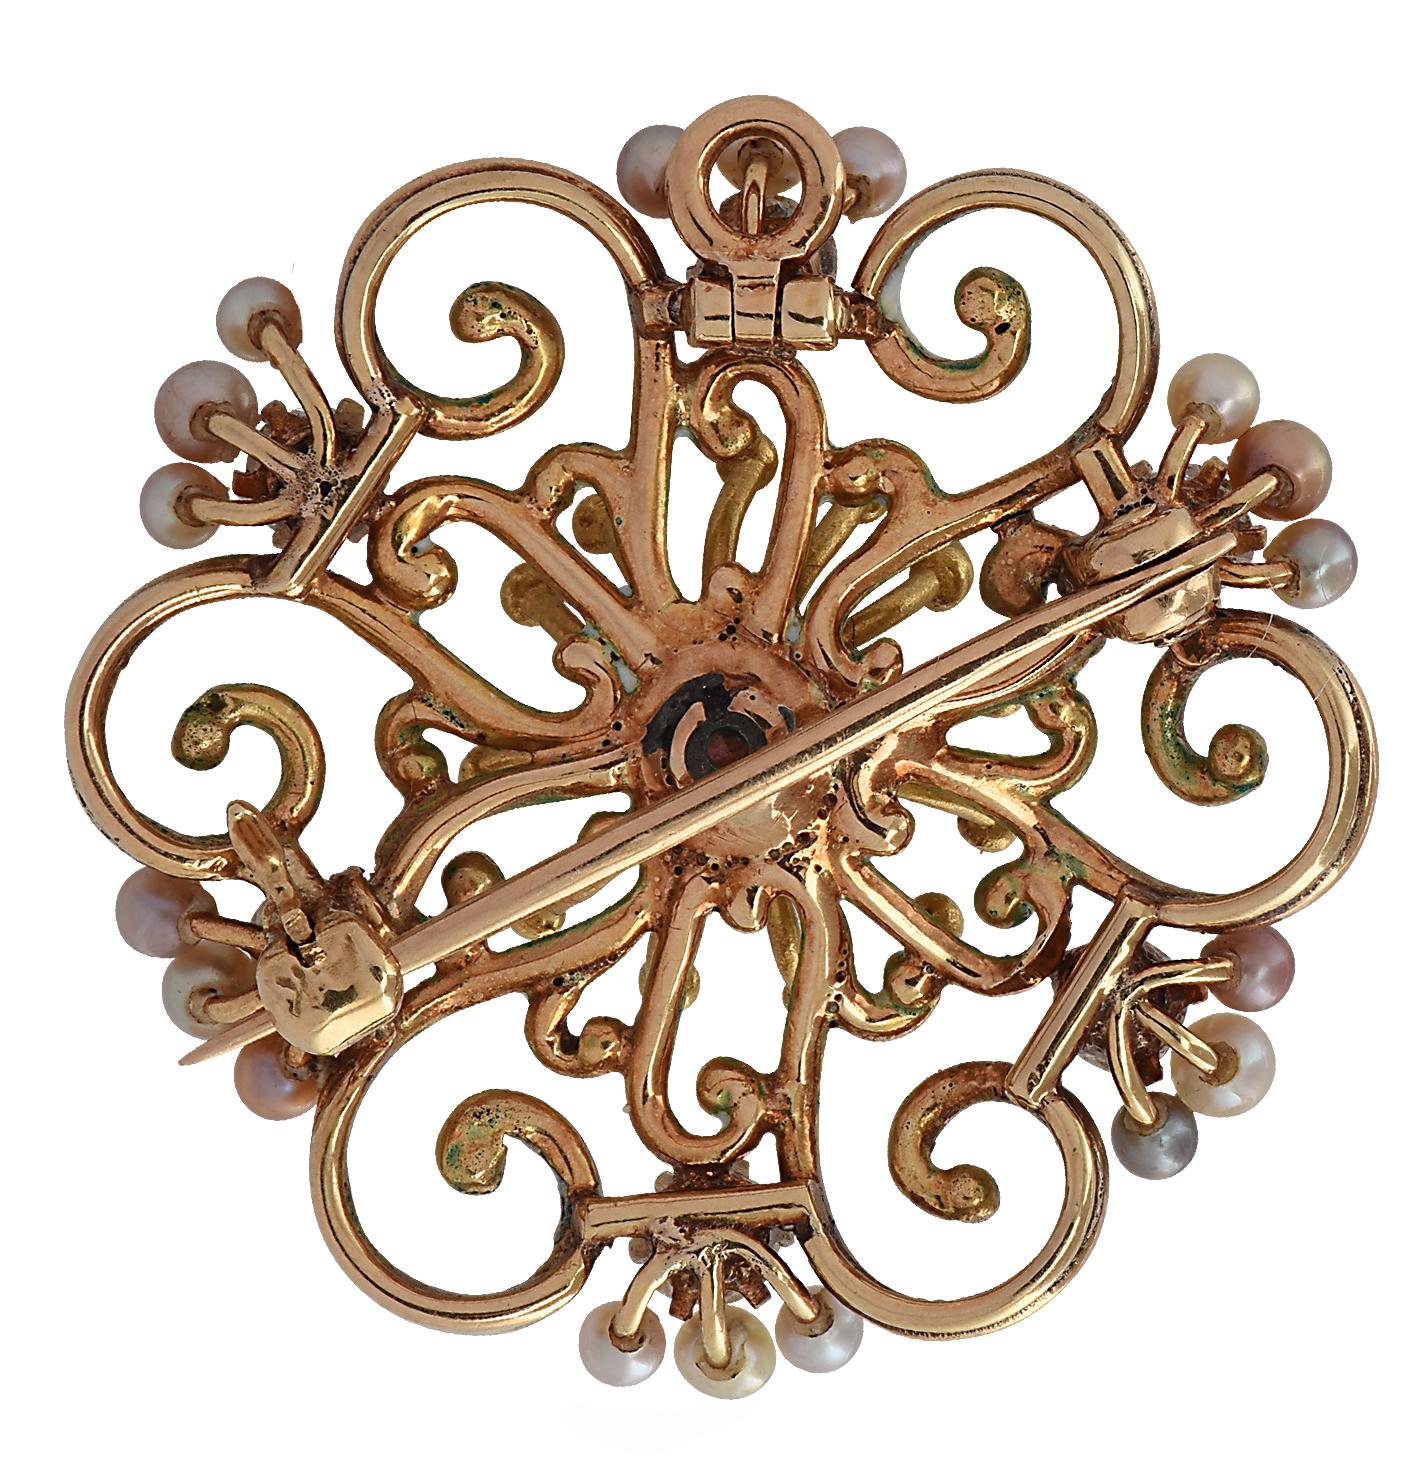 Sensational Victorian brooch pin crafted in yellow gold and enamel, showcasing 6 Mine cut diamonds weighing approximately 0.85 carats total, G color, SI clarity and 19 pearls set in an enchanting flower design, capturing the unparalleled beauty of